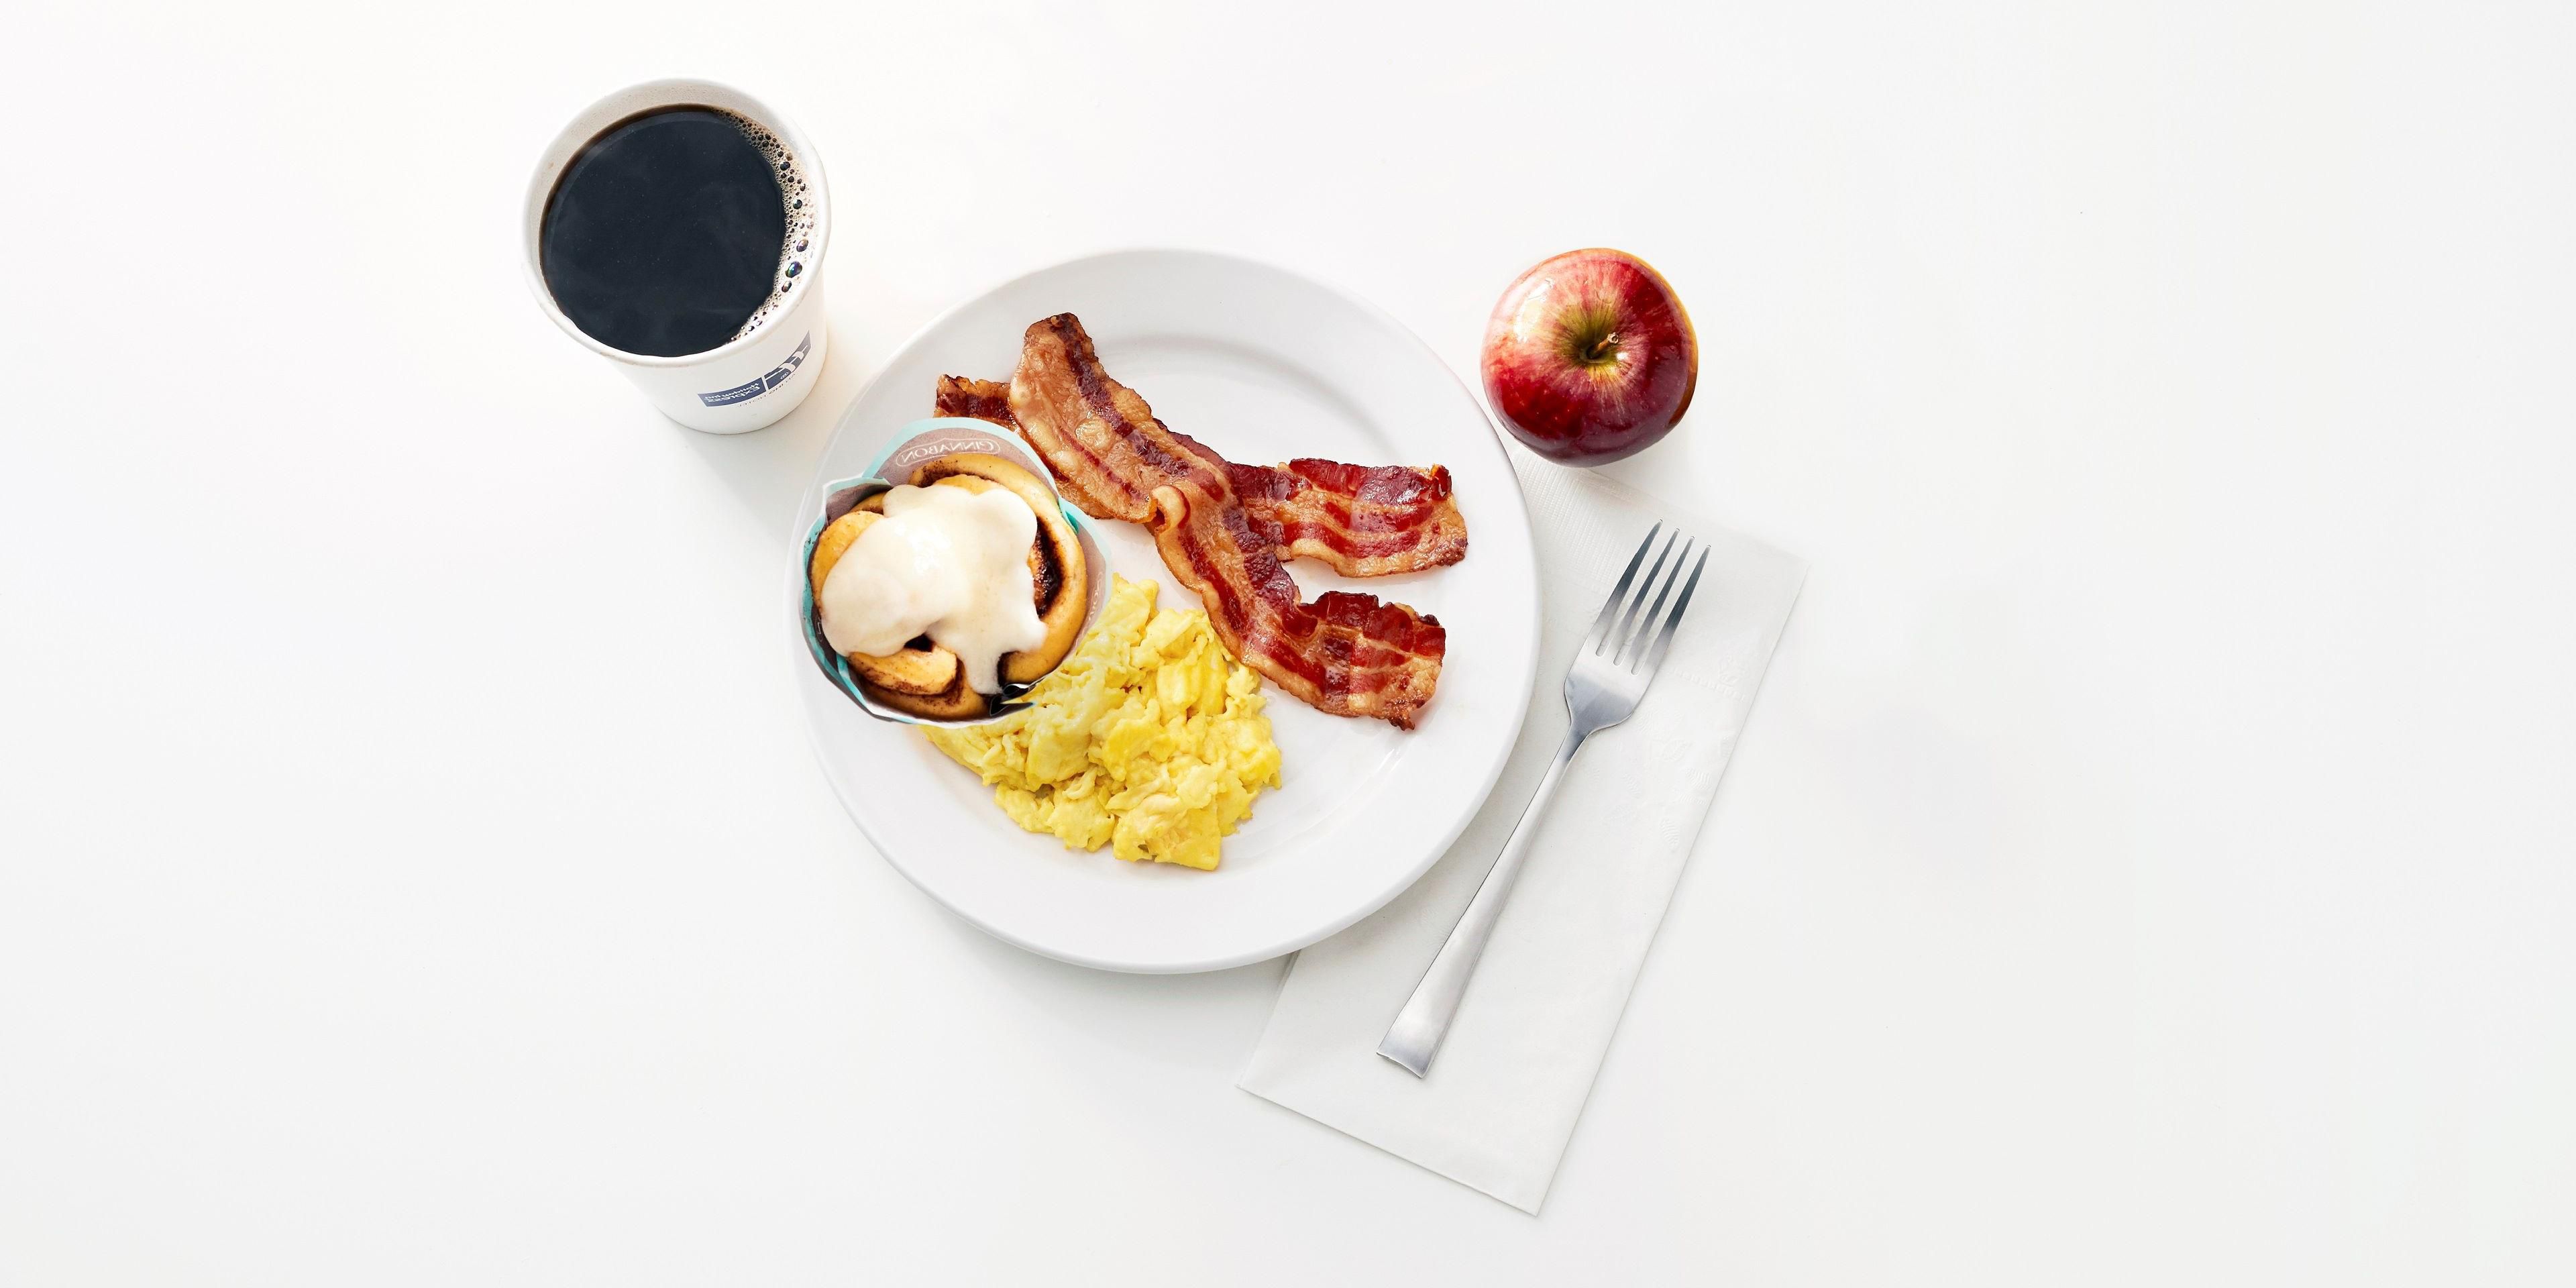 Kick start your day with our Express Start Breakfast, with grab ‘n’ go options and favorites such as eggs and bacon, hot pancakes, our signature cinnamon rolls and fresh coffee. Offered from 7am to 10am.